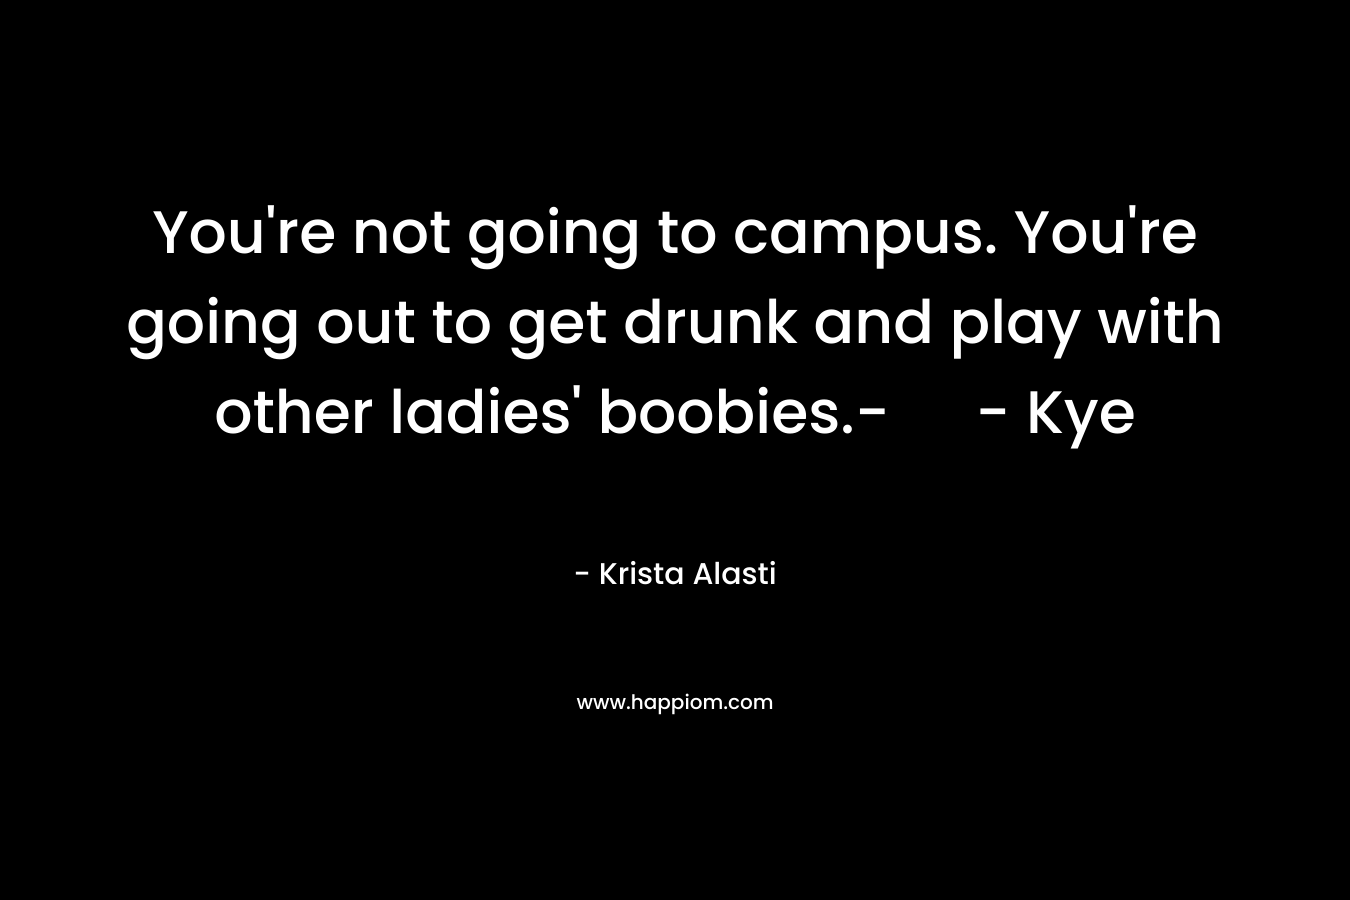 You're not going to campus. You're going out to get drunk and play with other ladies' boobies.- - Kye